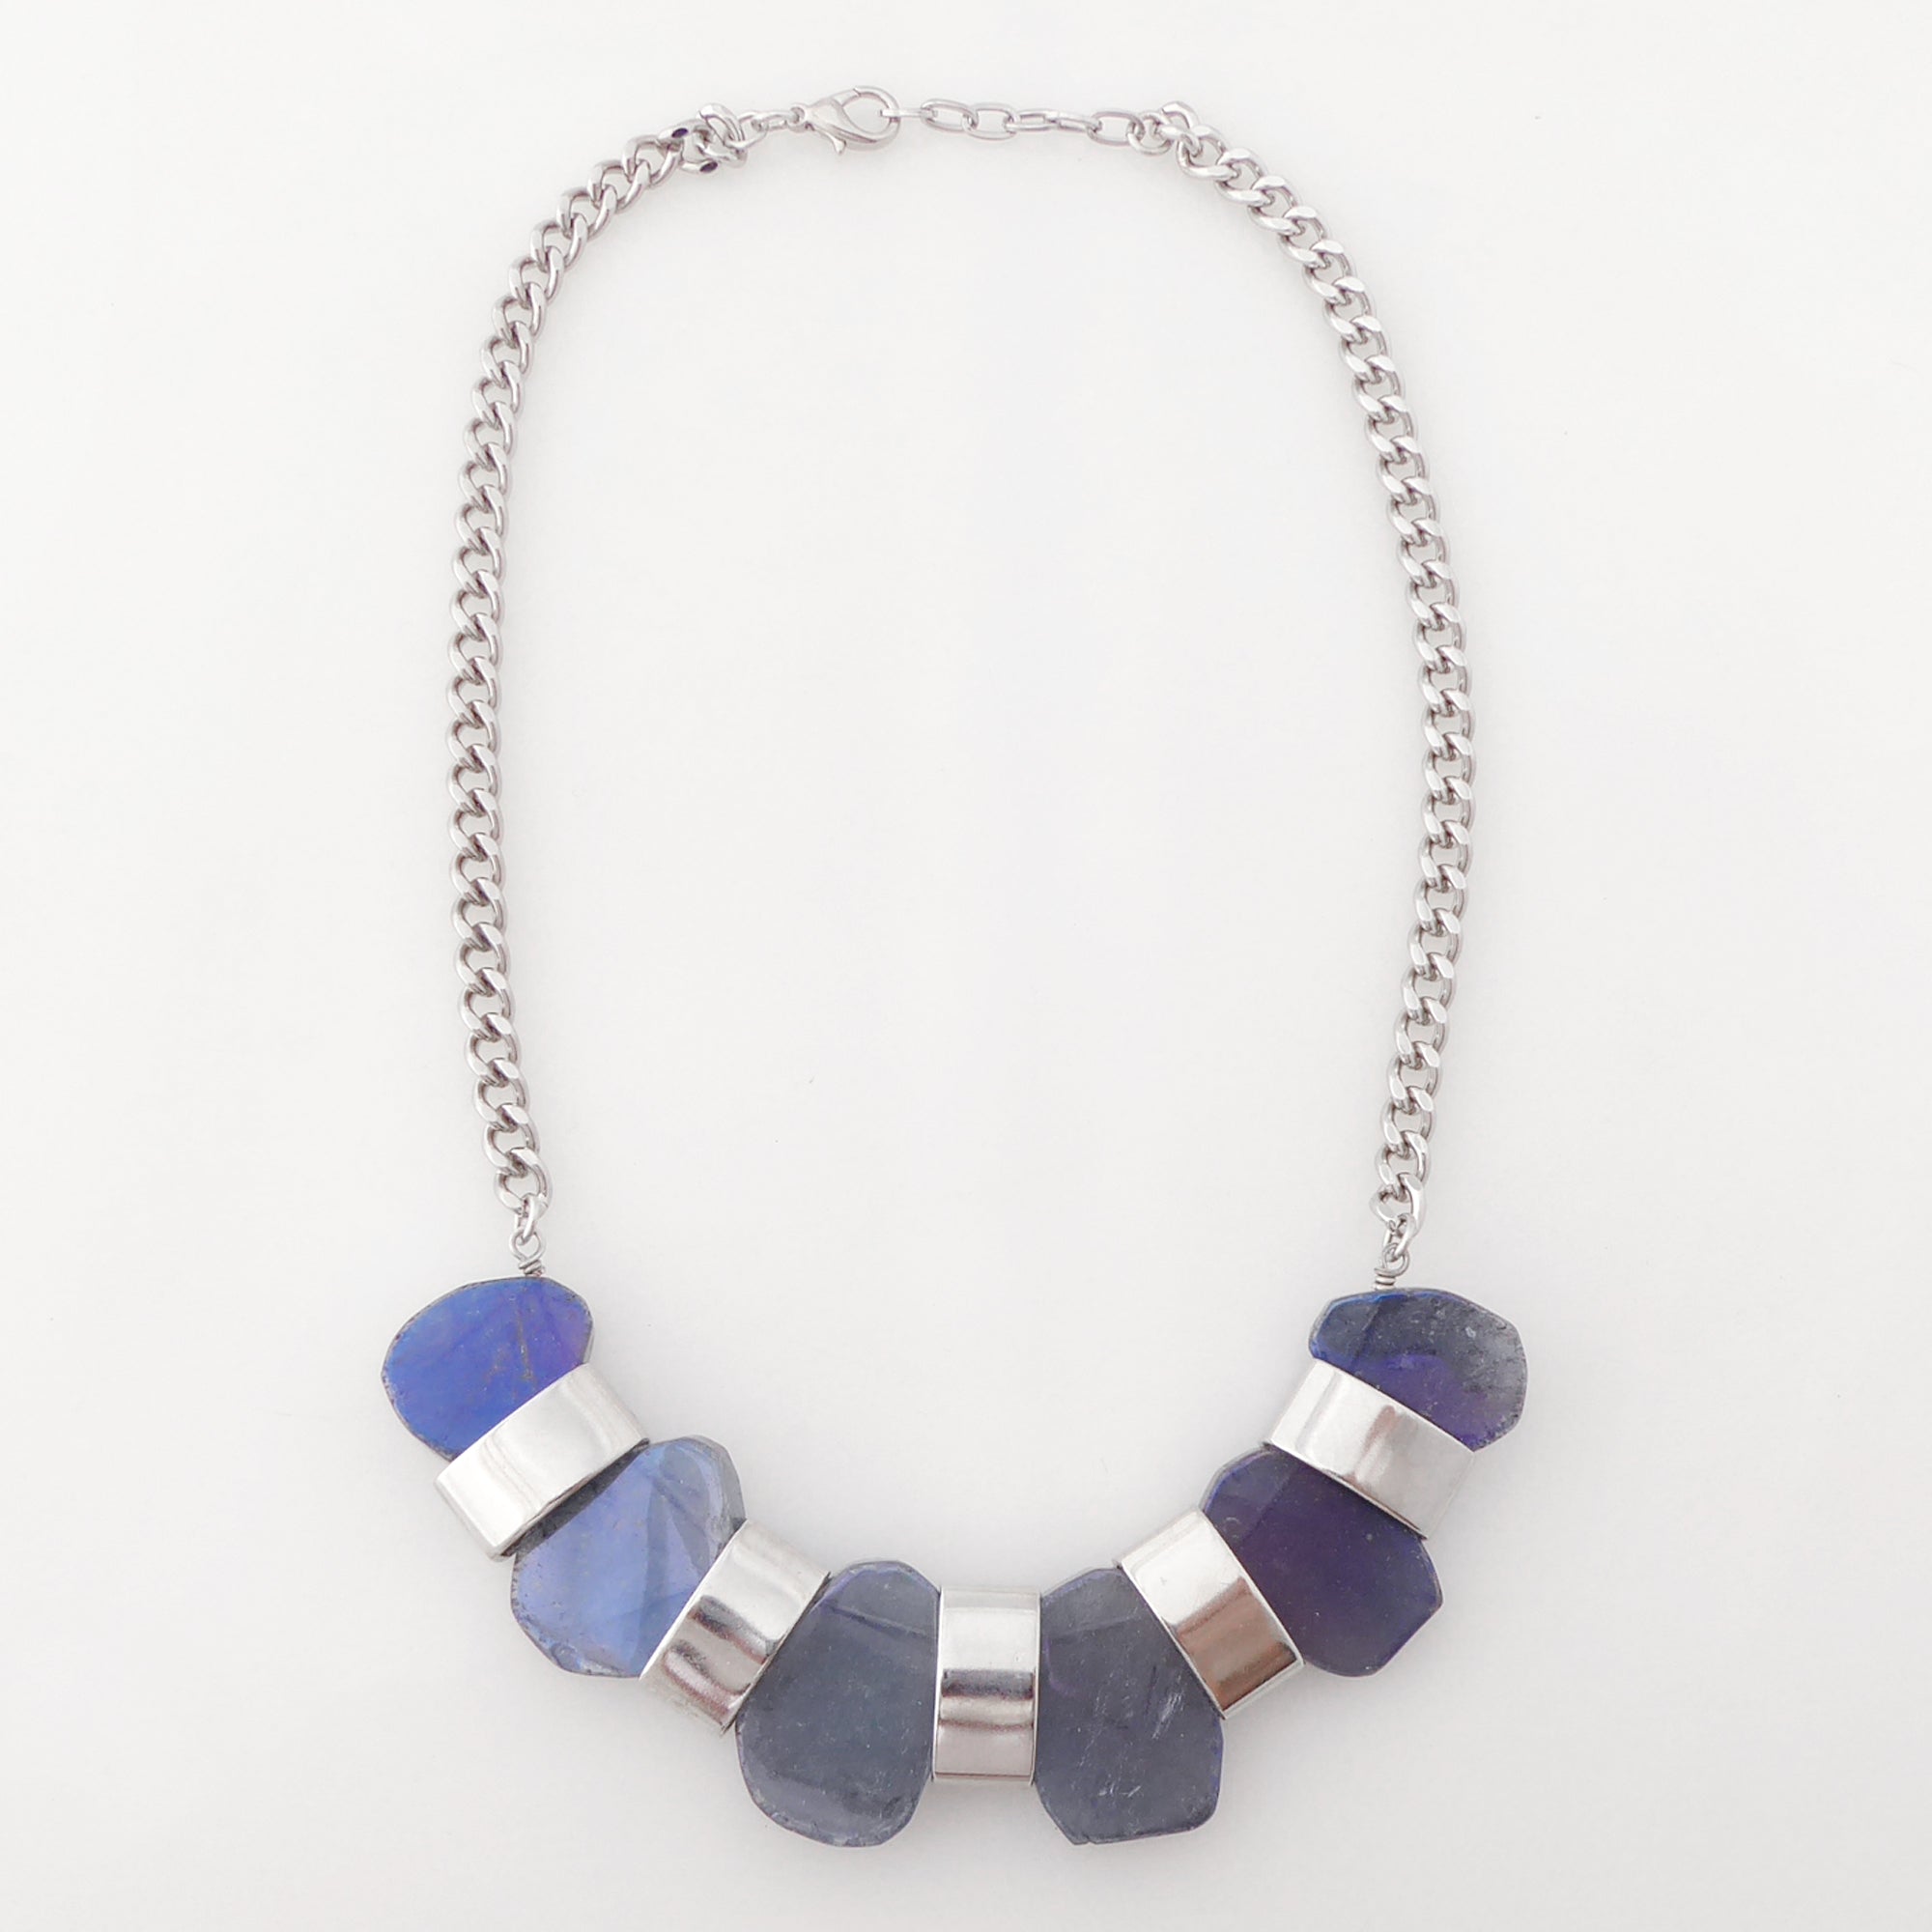 Iridescent blue agate necklace by Jenny Dayco 4